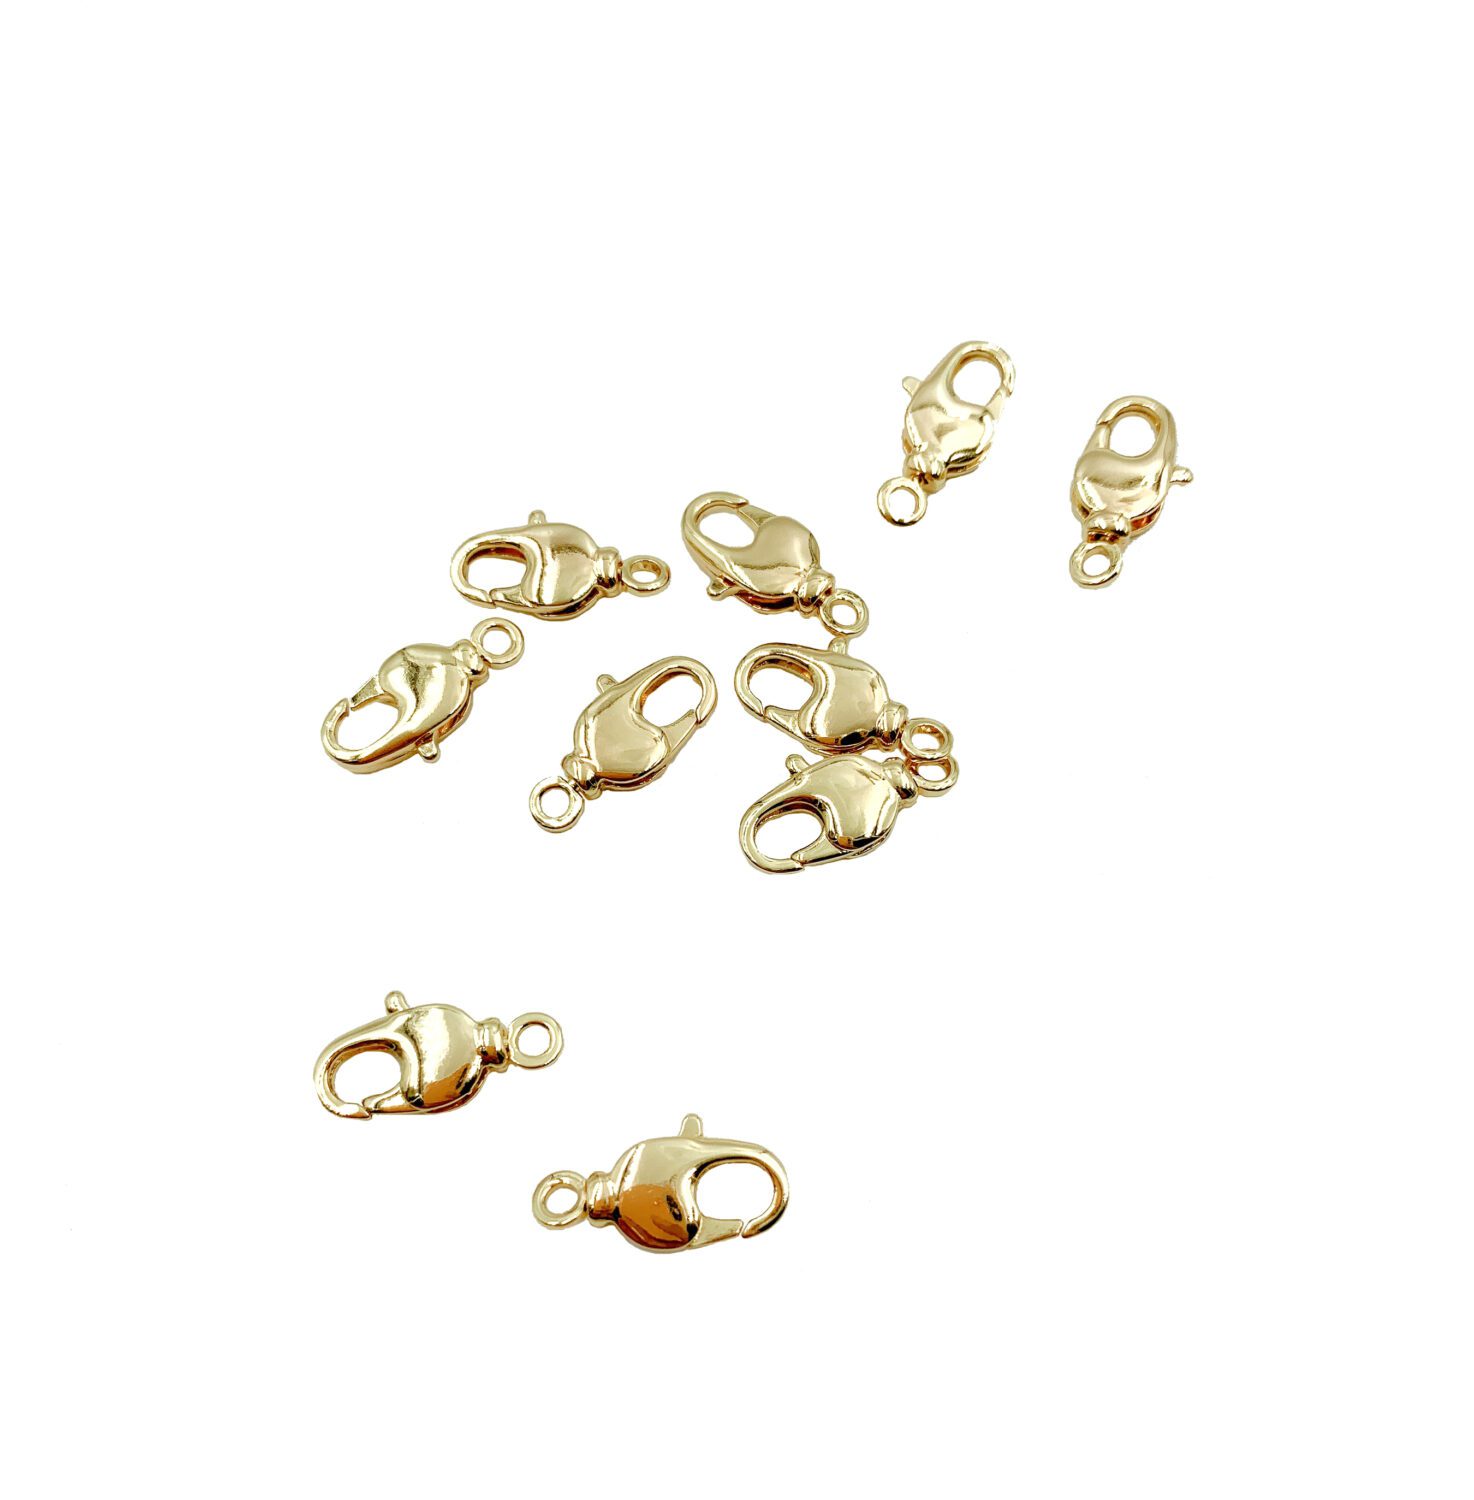 10×18 mm 22K Gold Swivel Lobster Clasp, Thick 22K Gold Filled Lobster ...